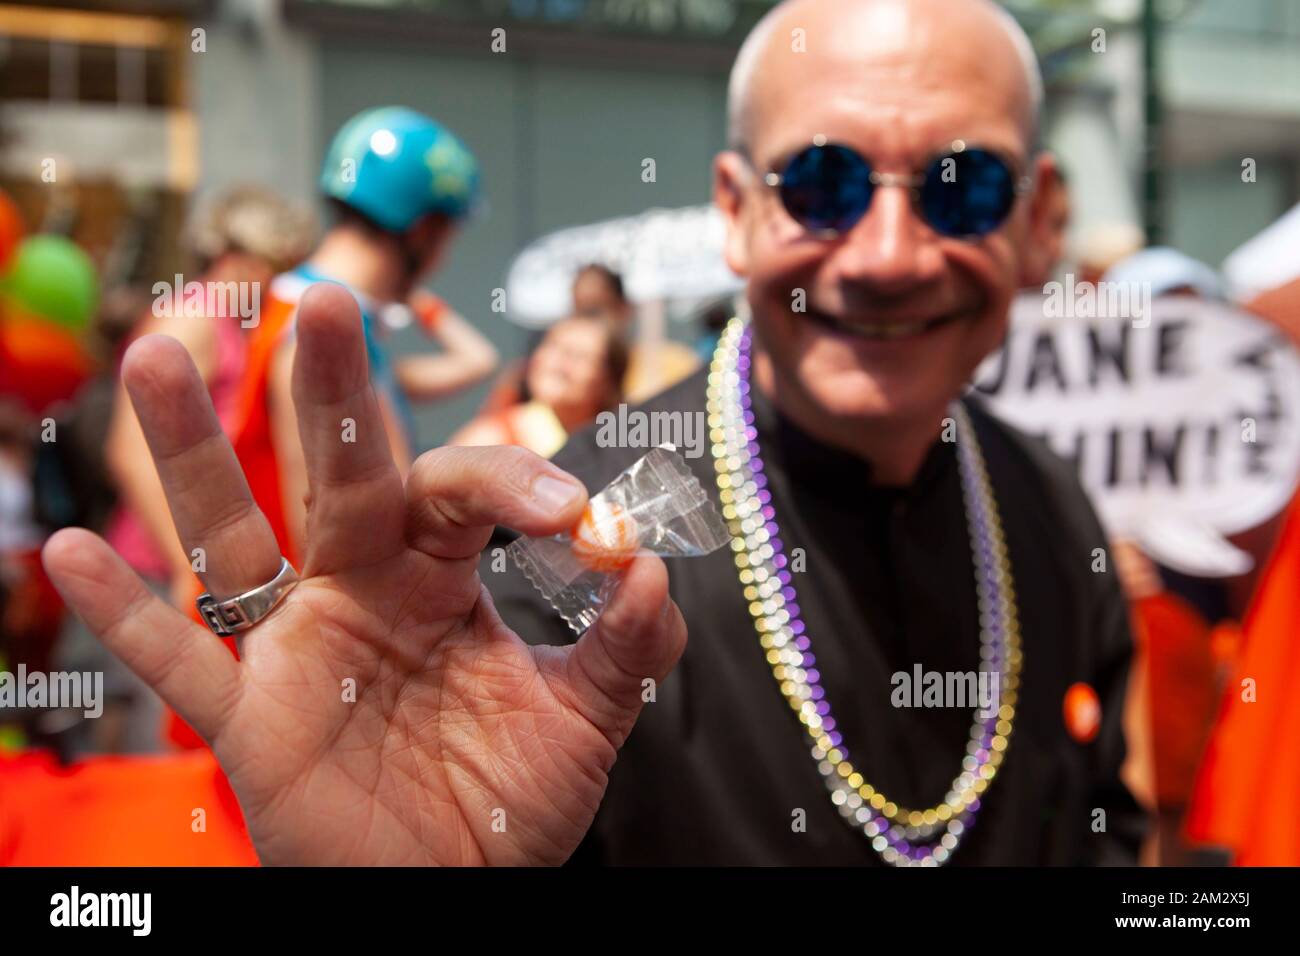 Pride parade participant offering sweet, crowd in background, Vancouver Pride Festival 2014, Vancouver, Canada Stock Photo